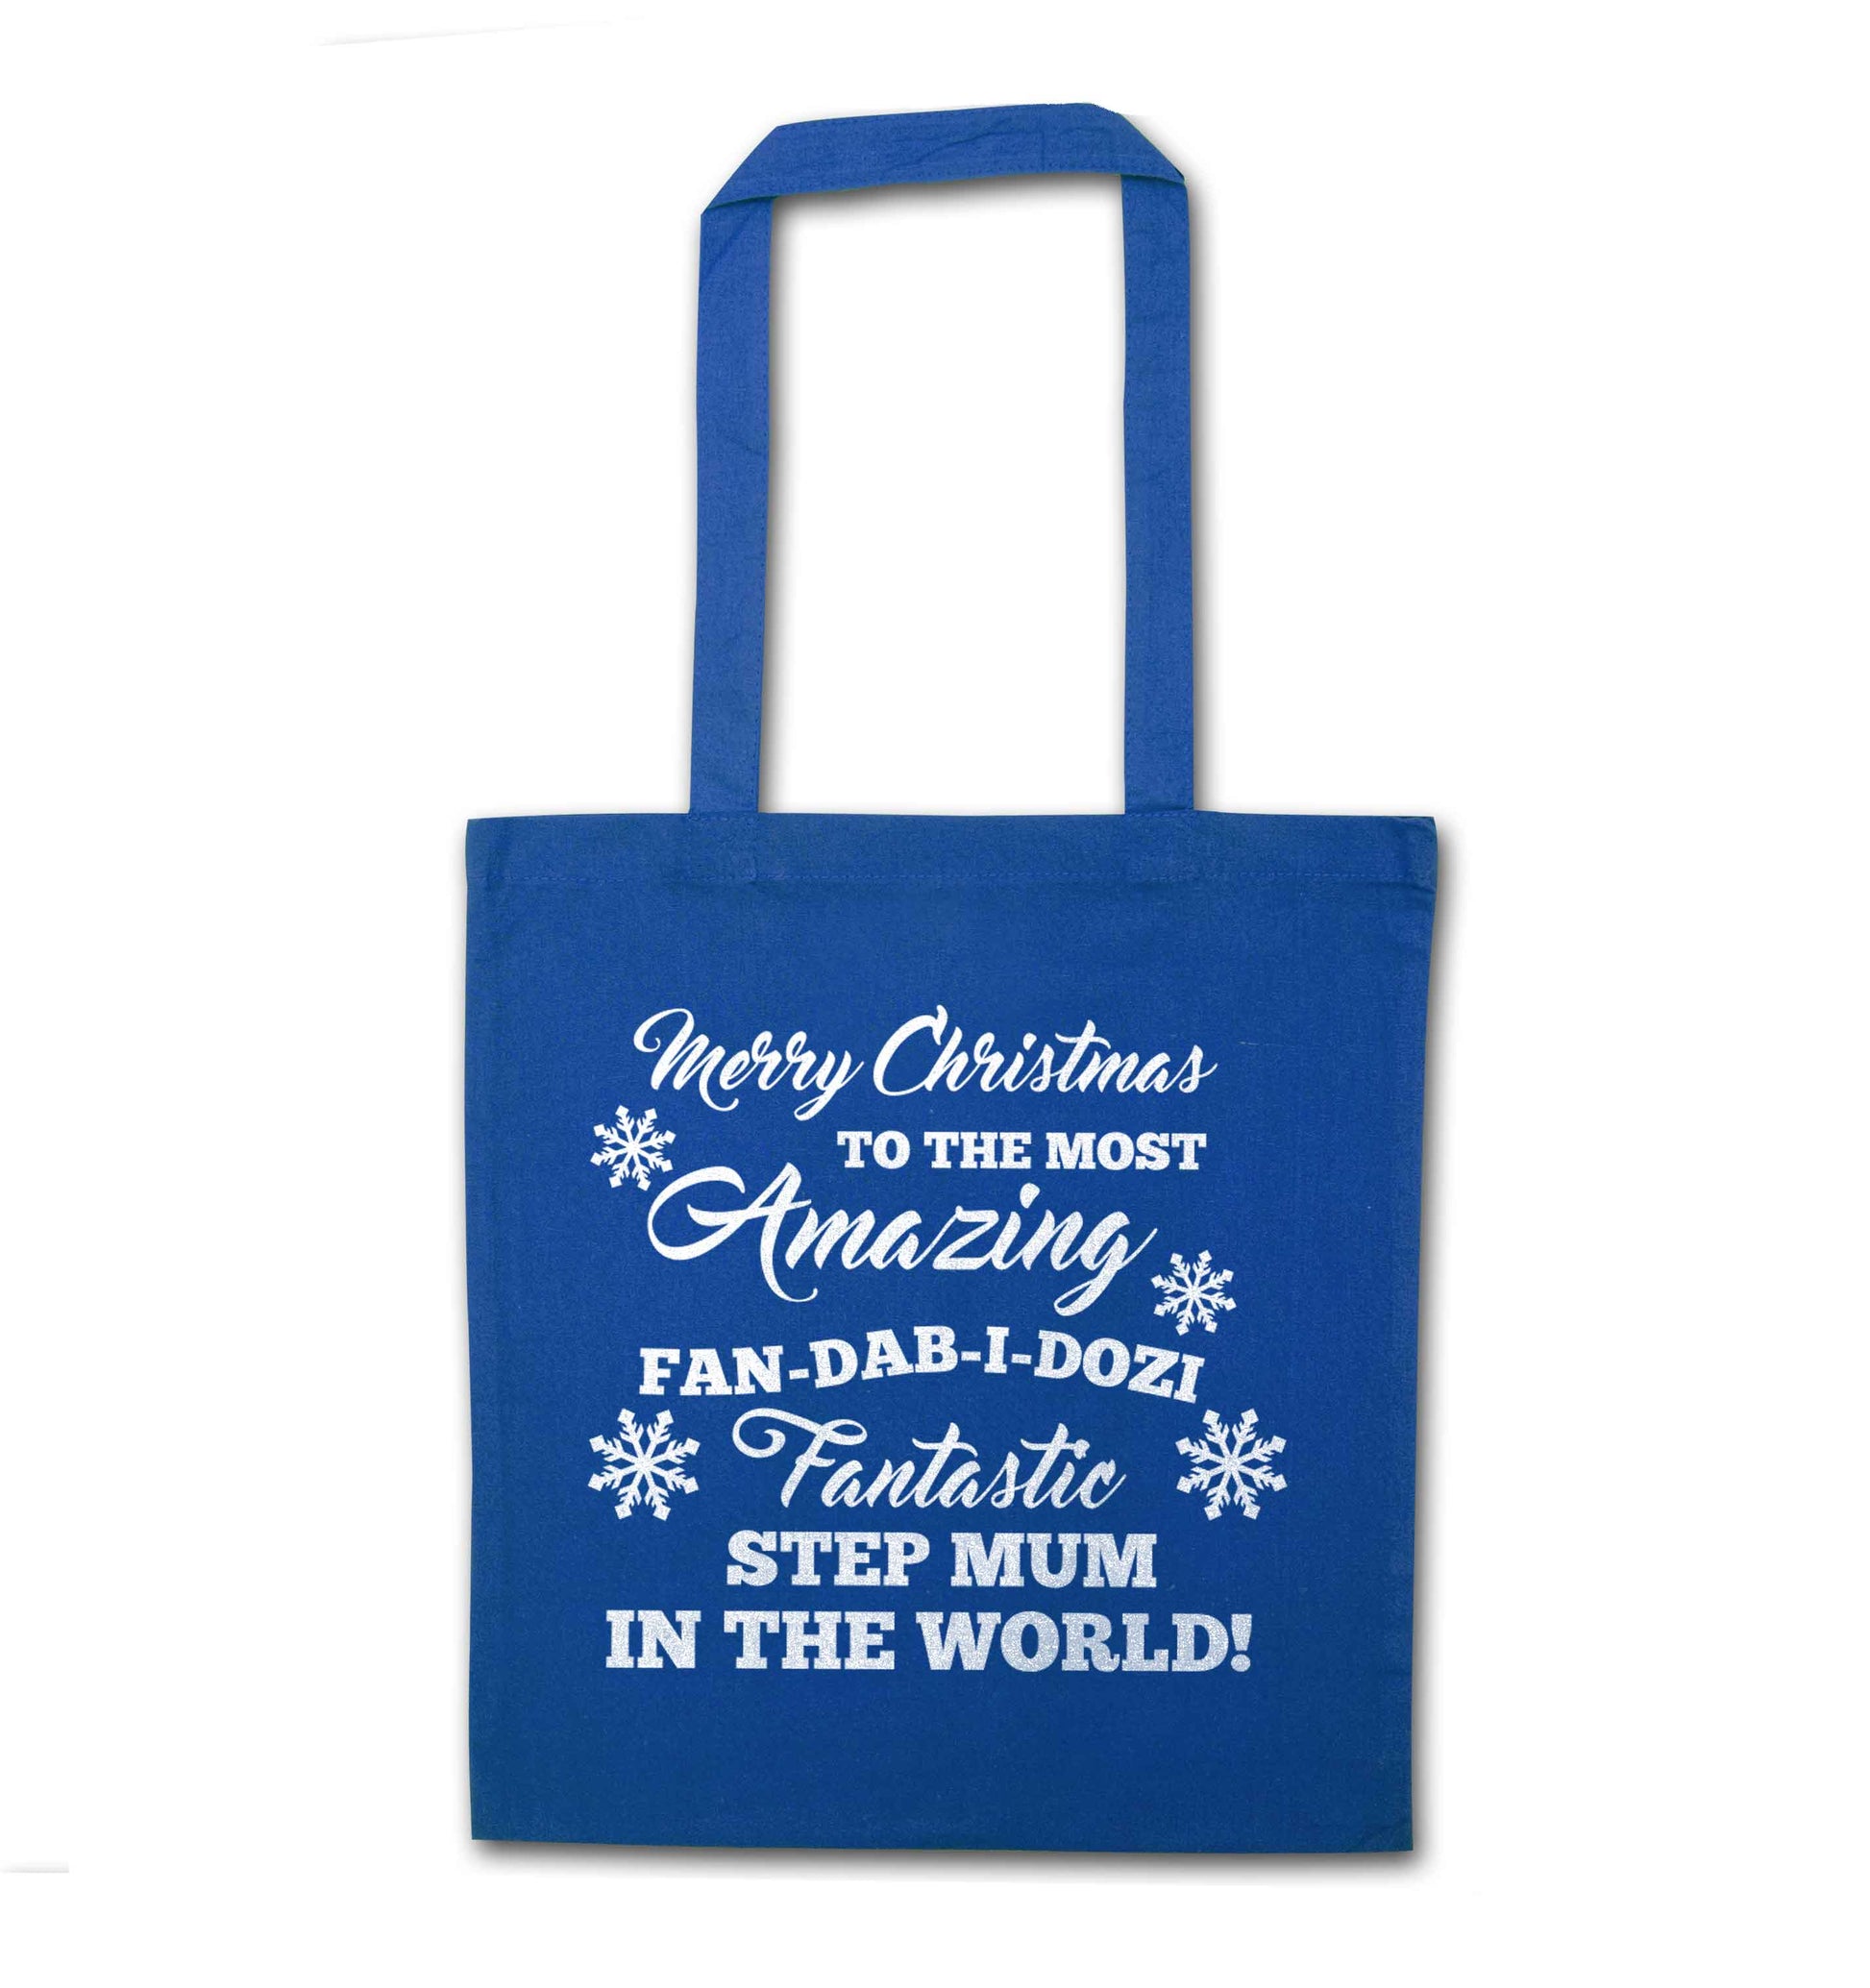 Merry Christmas to the most amazing fan-dab-i-dozi fantasic Step Mum in the world blue tote bag